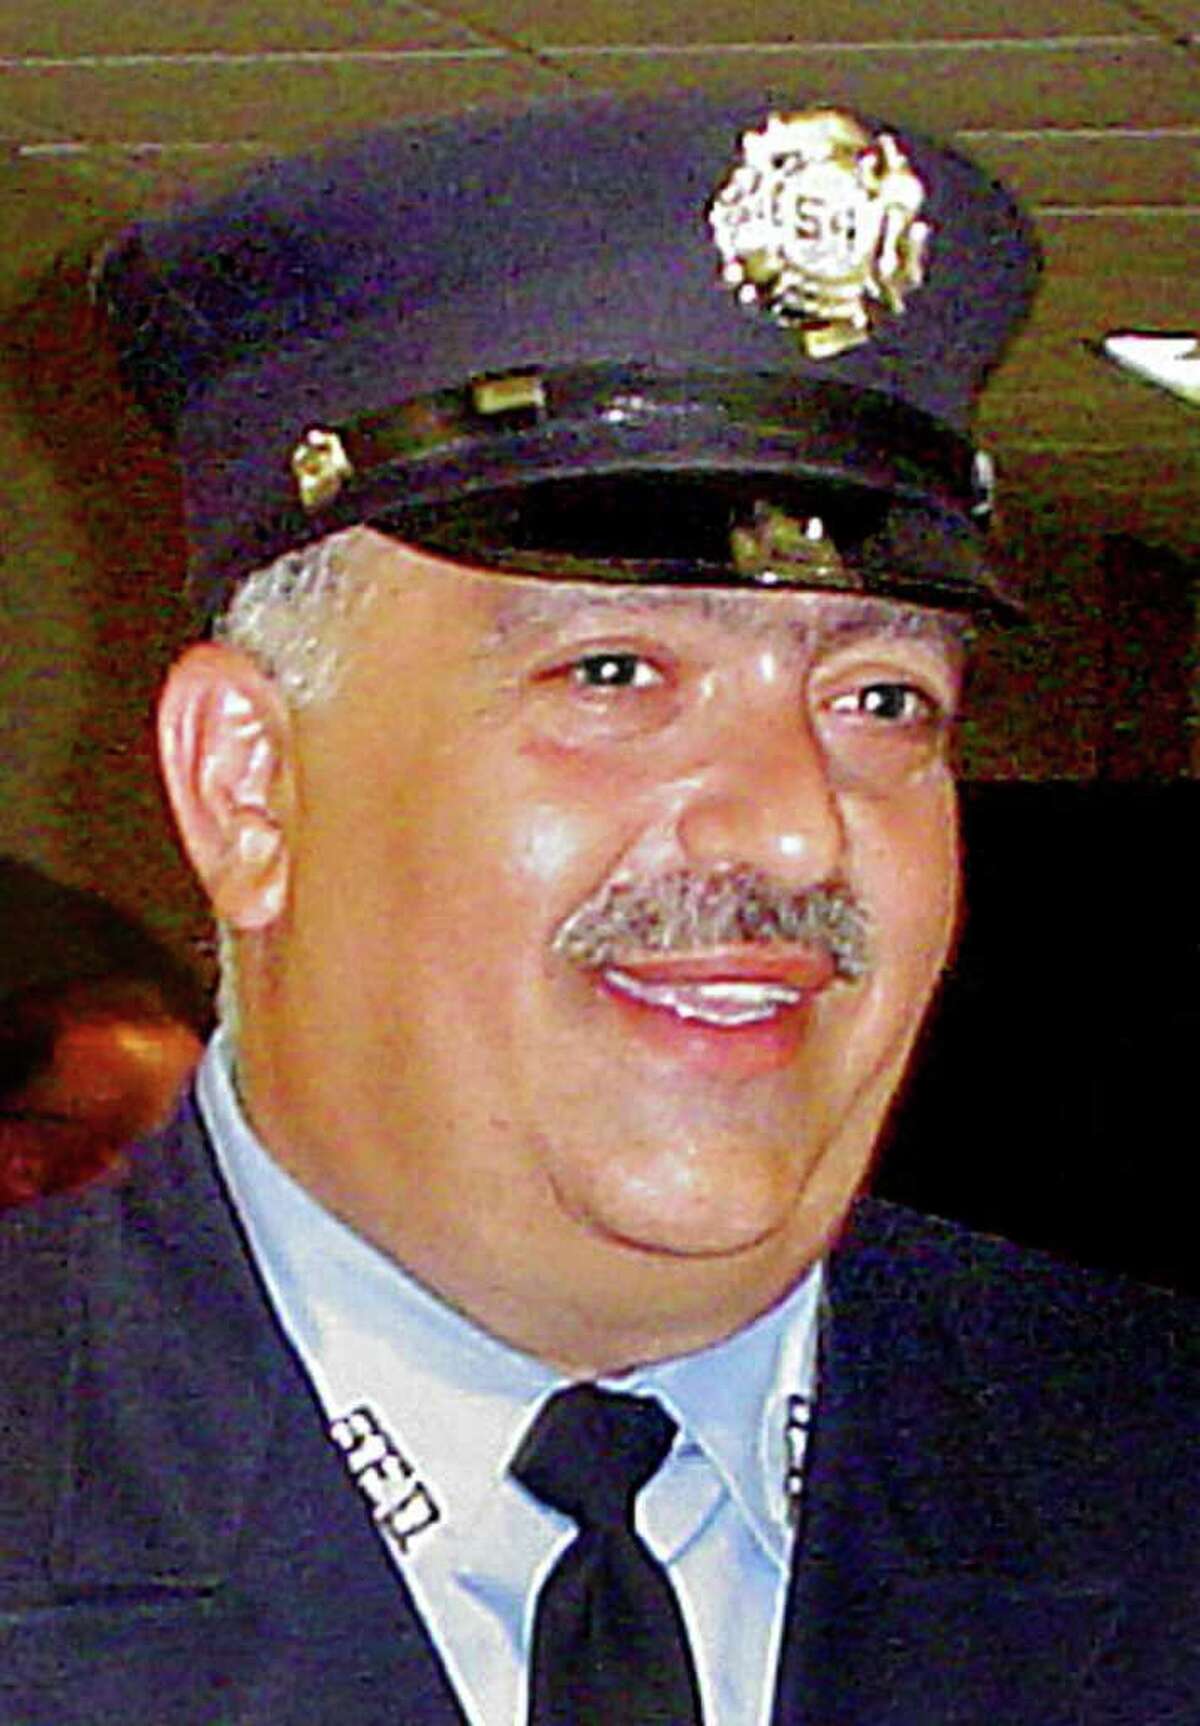 Bridgeport firefighter Michel Baik. Baik died while fighting a fire at 41 Elmwood Ave on Saturday, July 24, 2010.